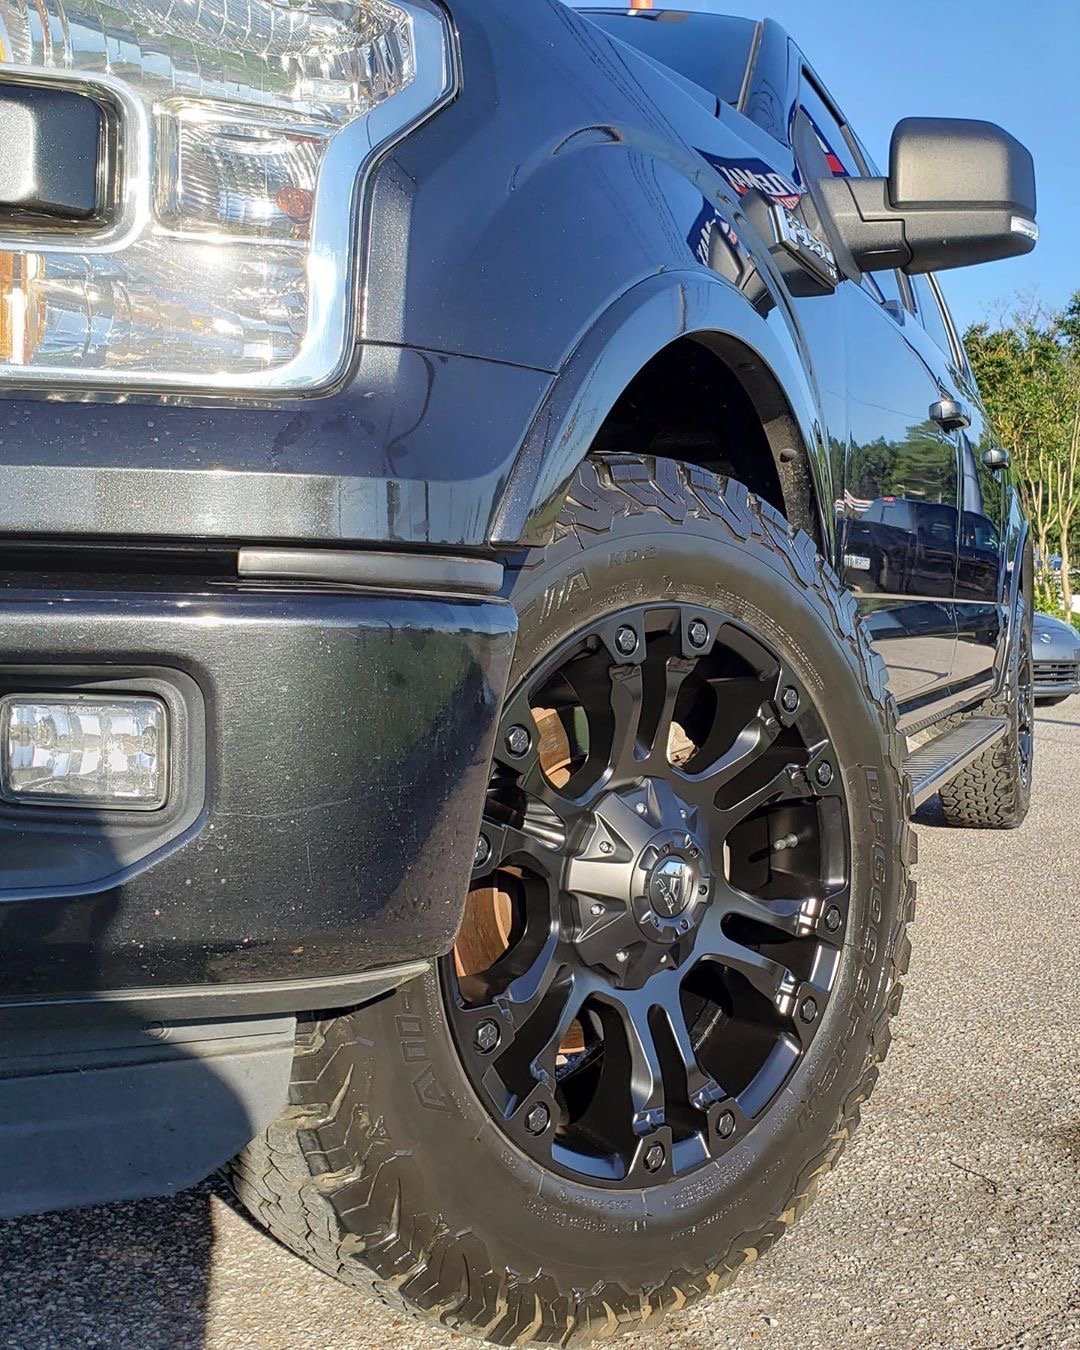 2019 Ford F-150 4x4 Packages - Tires and Engine Performance